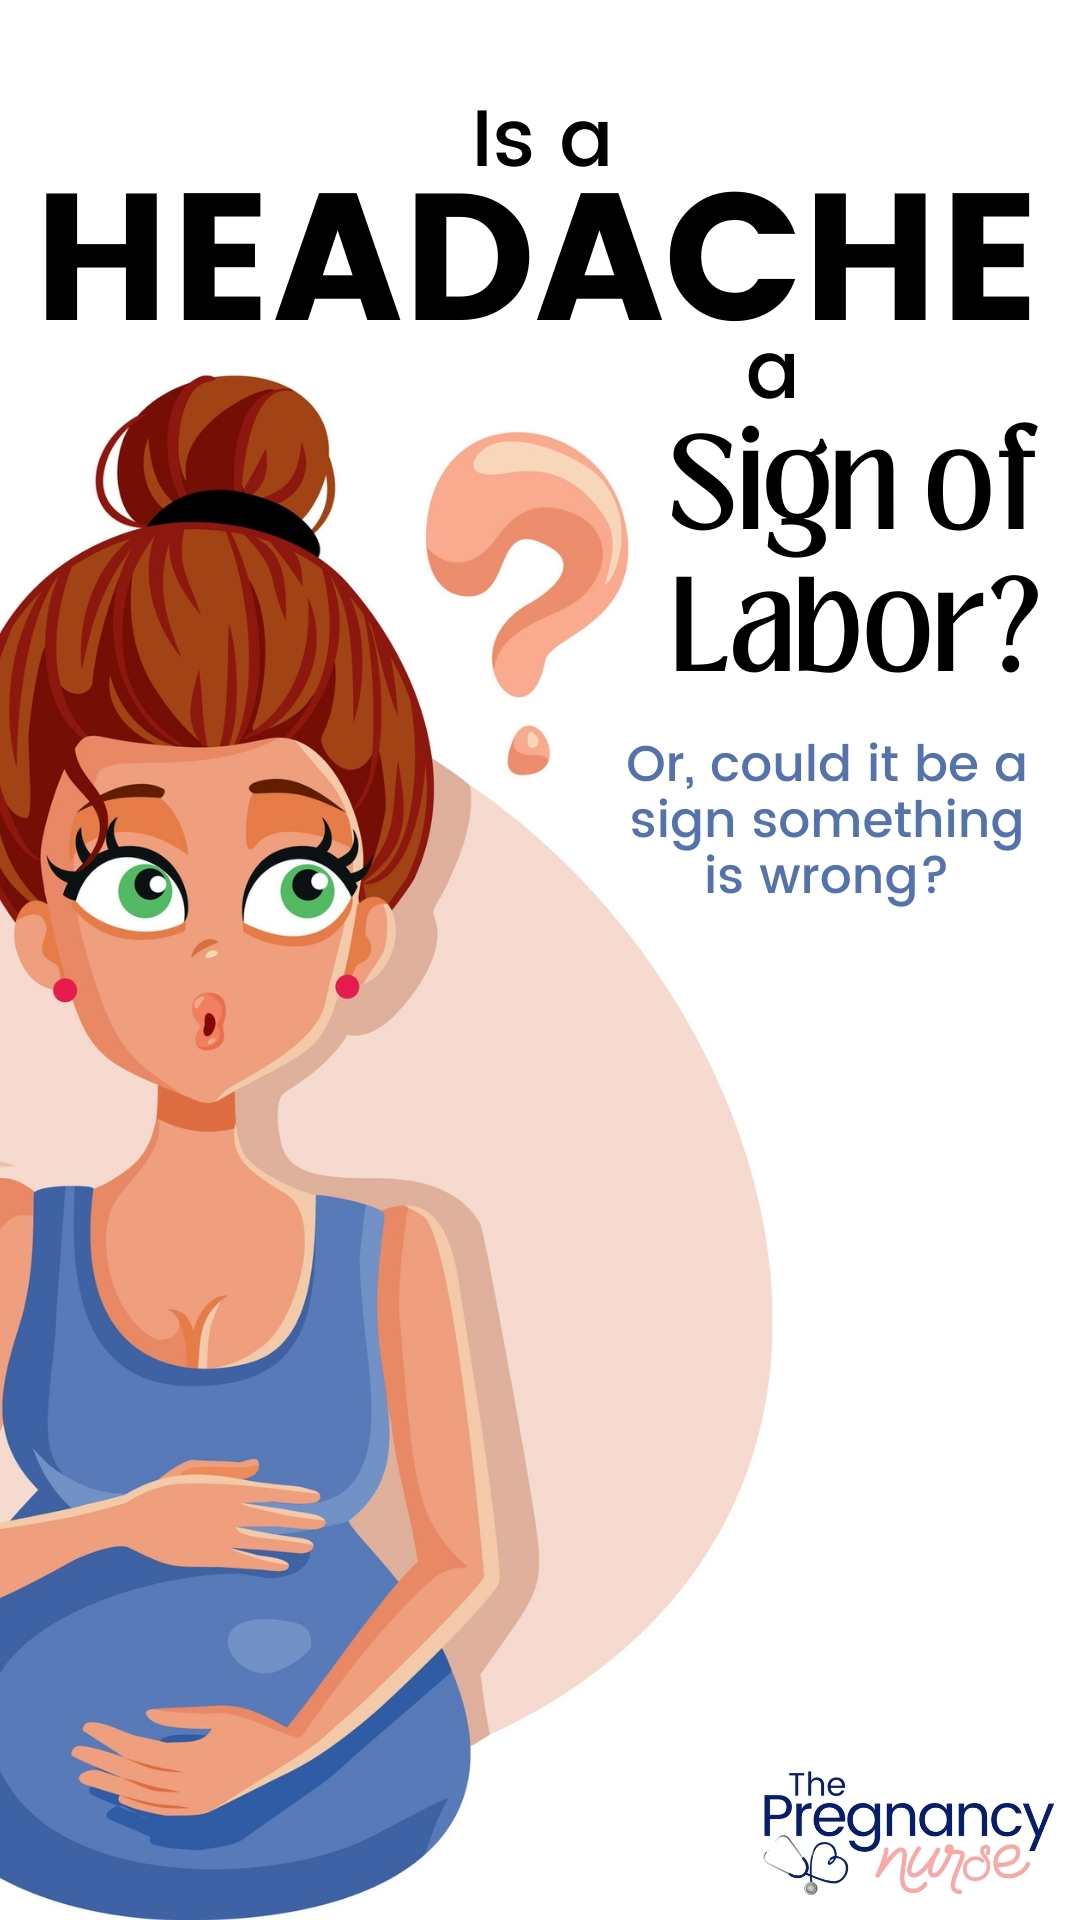 The early signs of labor can be hard to manage -- they include contractions, but is a headache one? How do you recognize the early signs in your third trimester?